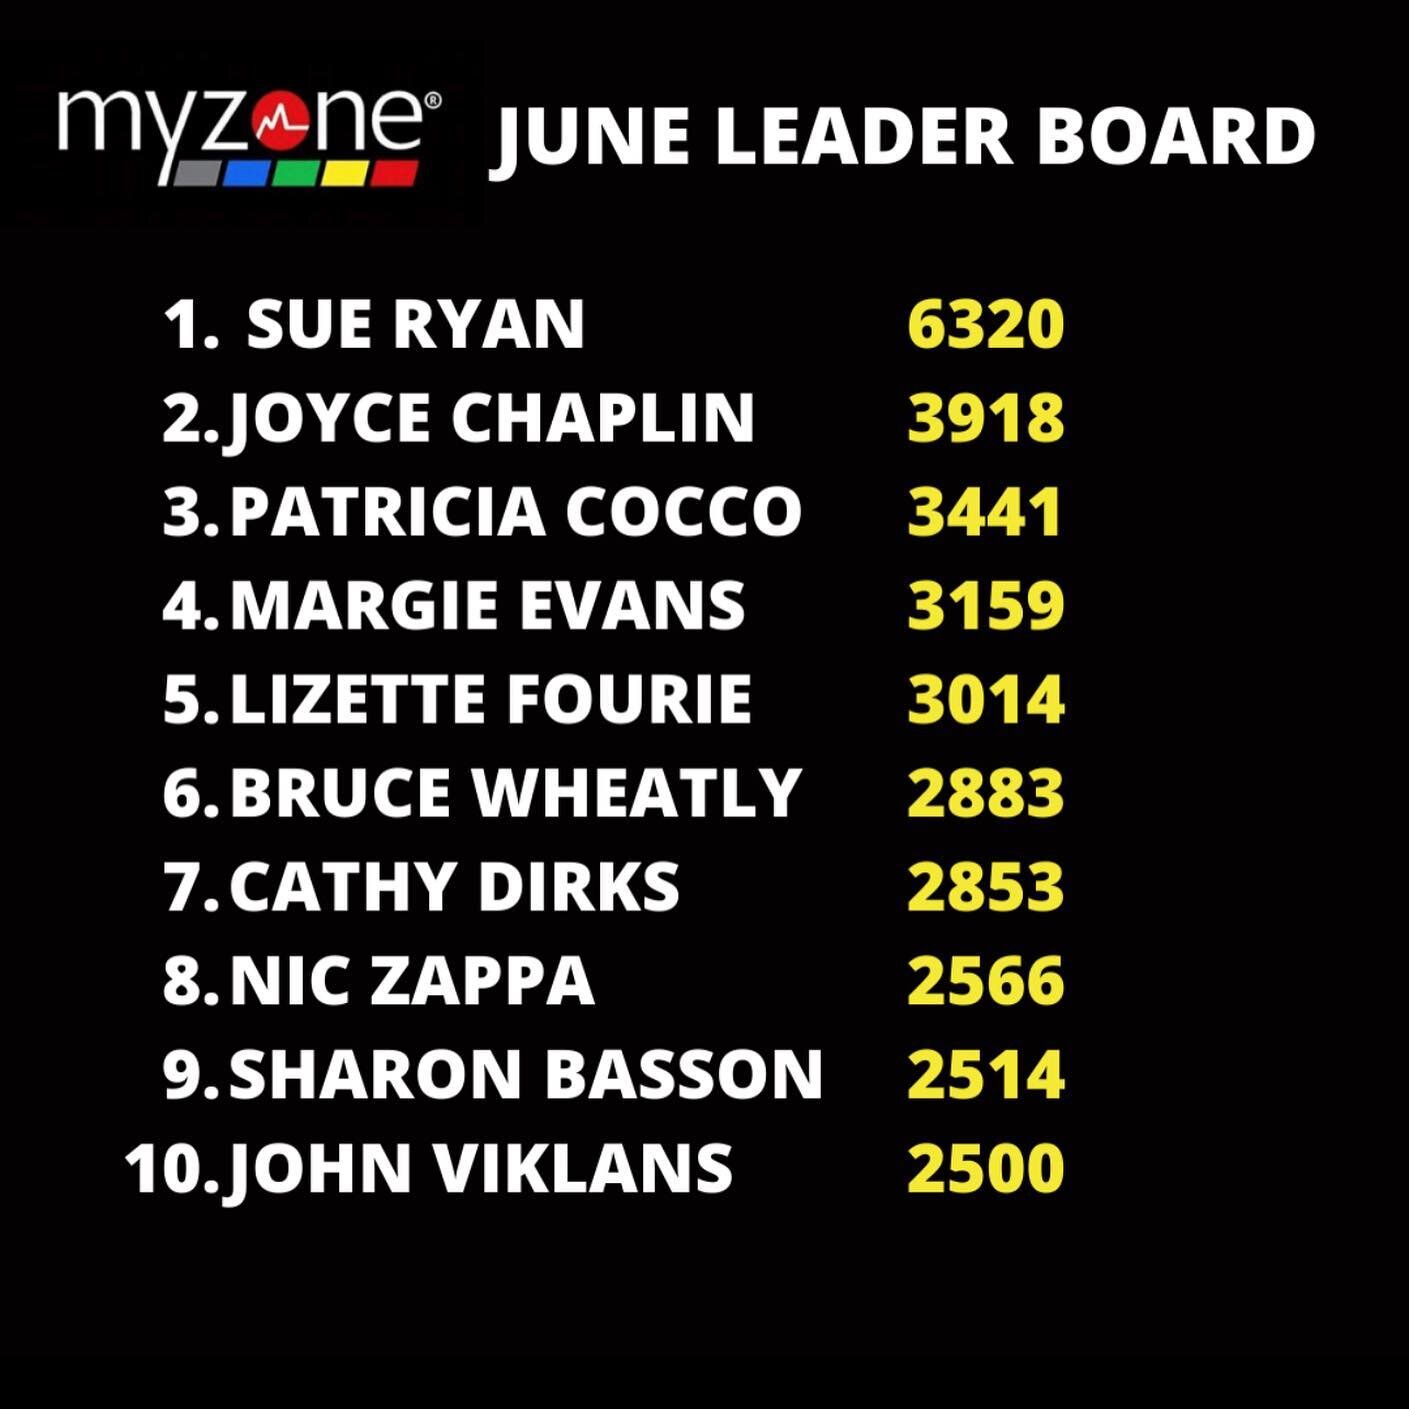 📢ANNOUNCEMENT 📢
Massive shout out to our MEMBER OF THE MONTH Sue Ryan, for earning a whopping 6320 @myzonemoves MEP&rsquo;s for June!! Also well done to the Top 10!!!!!! Fantastic job 👏👏👏👏
Also, WINNER OF OUR ONLINE MEP CHALLENGE is @seth_mich 